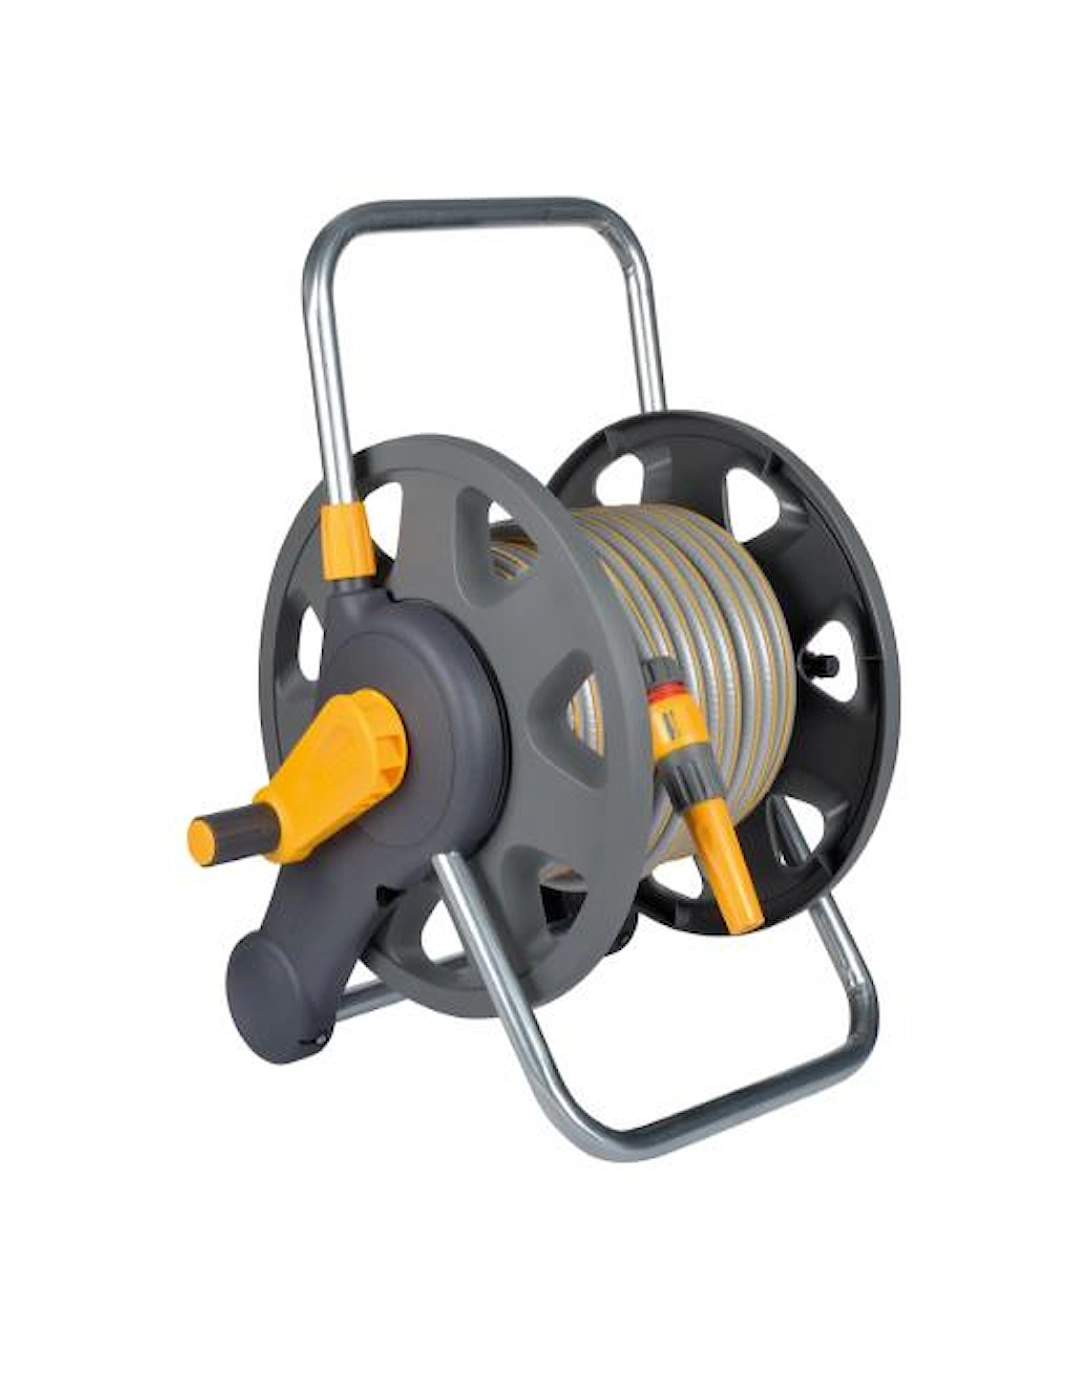 Assembled 2-in-1 Hose Reel with  20m Hose, 7 of 6